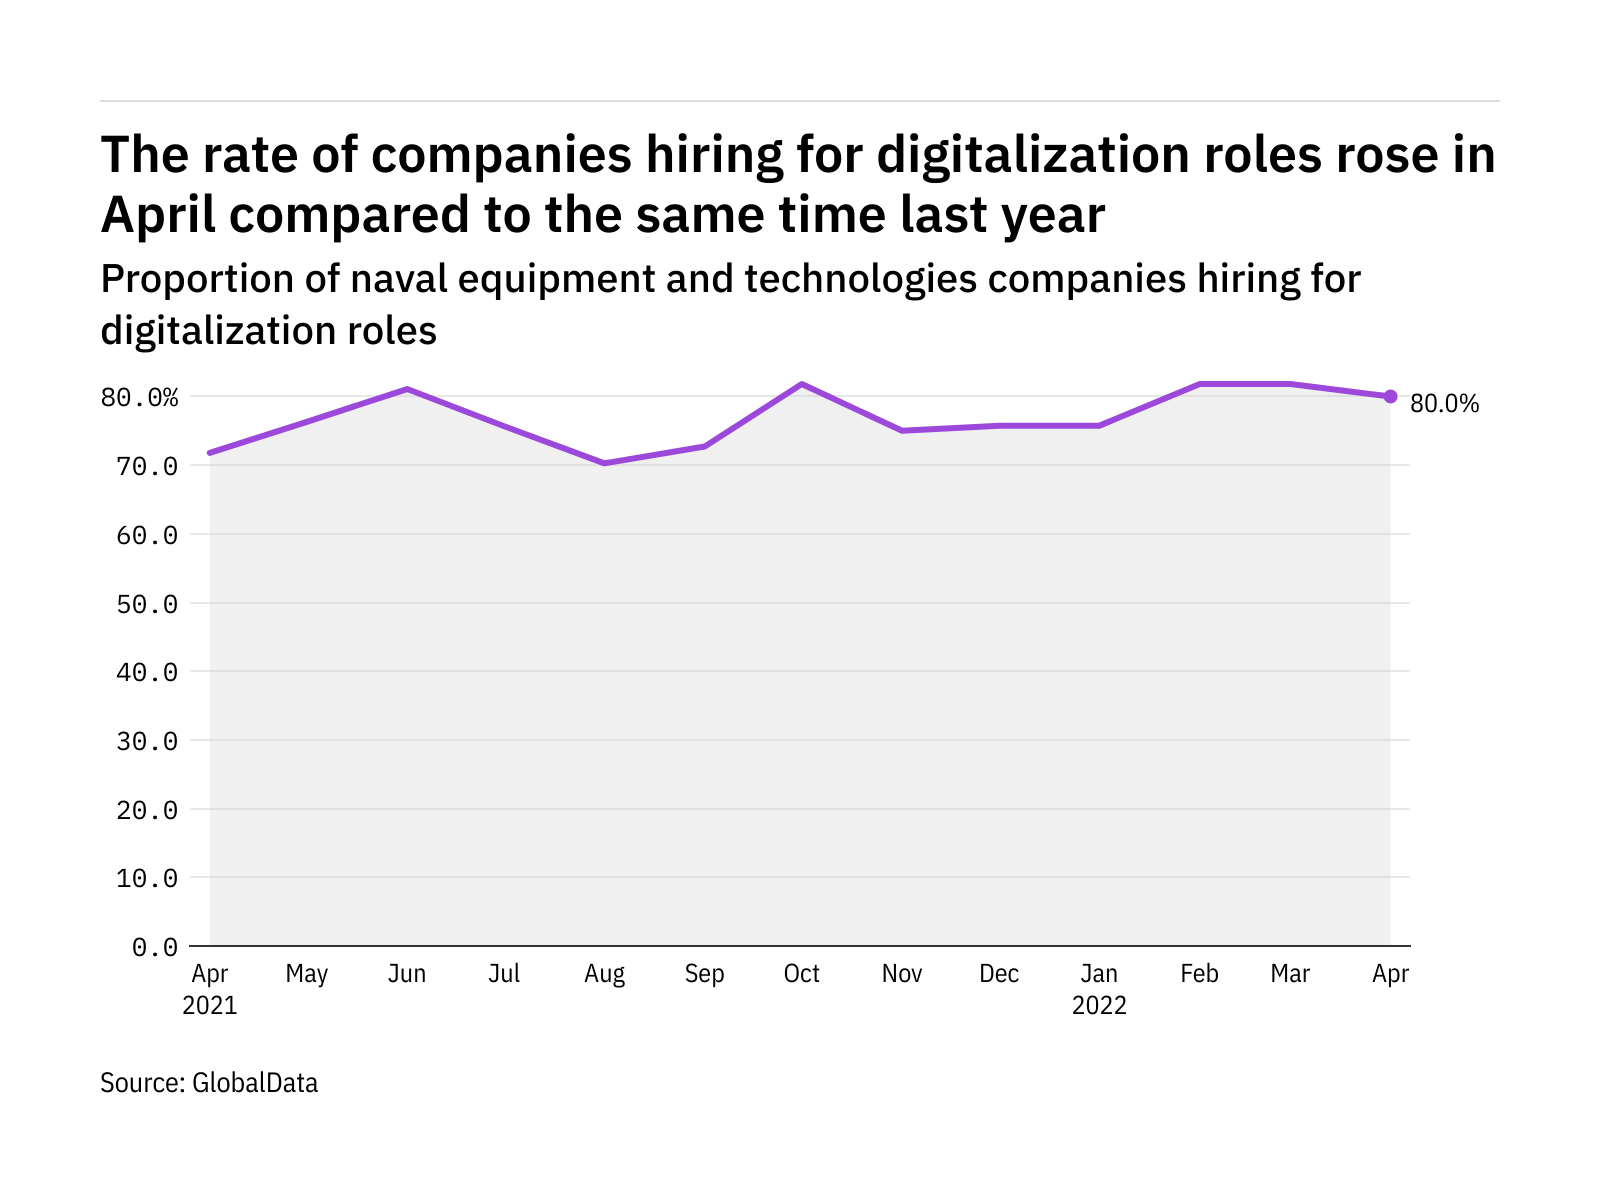 Digitalization hiring levels in the naval industry rose in April 2022